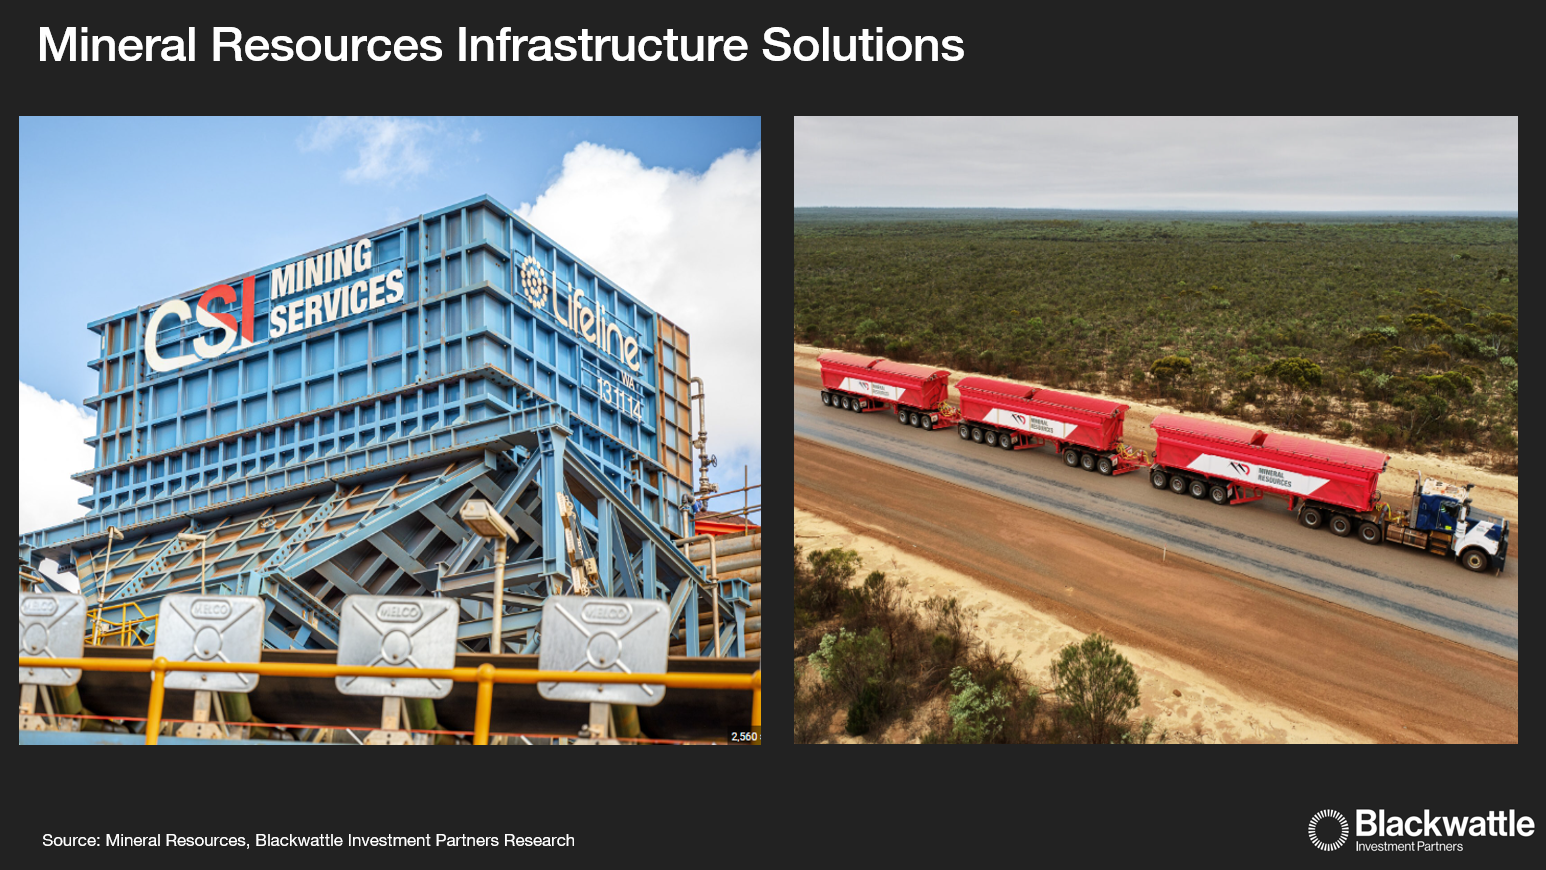 Mineral Resources solutions